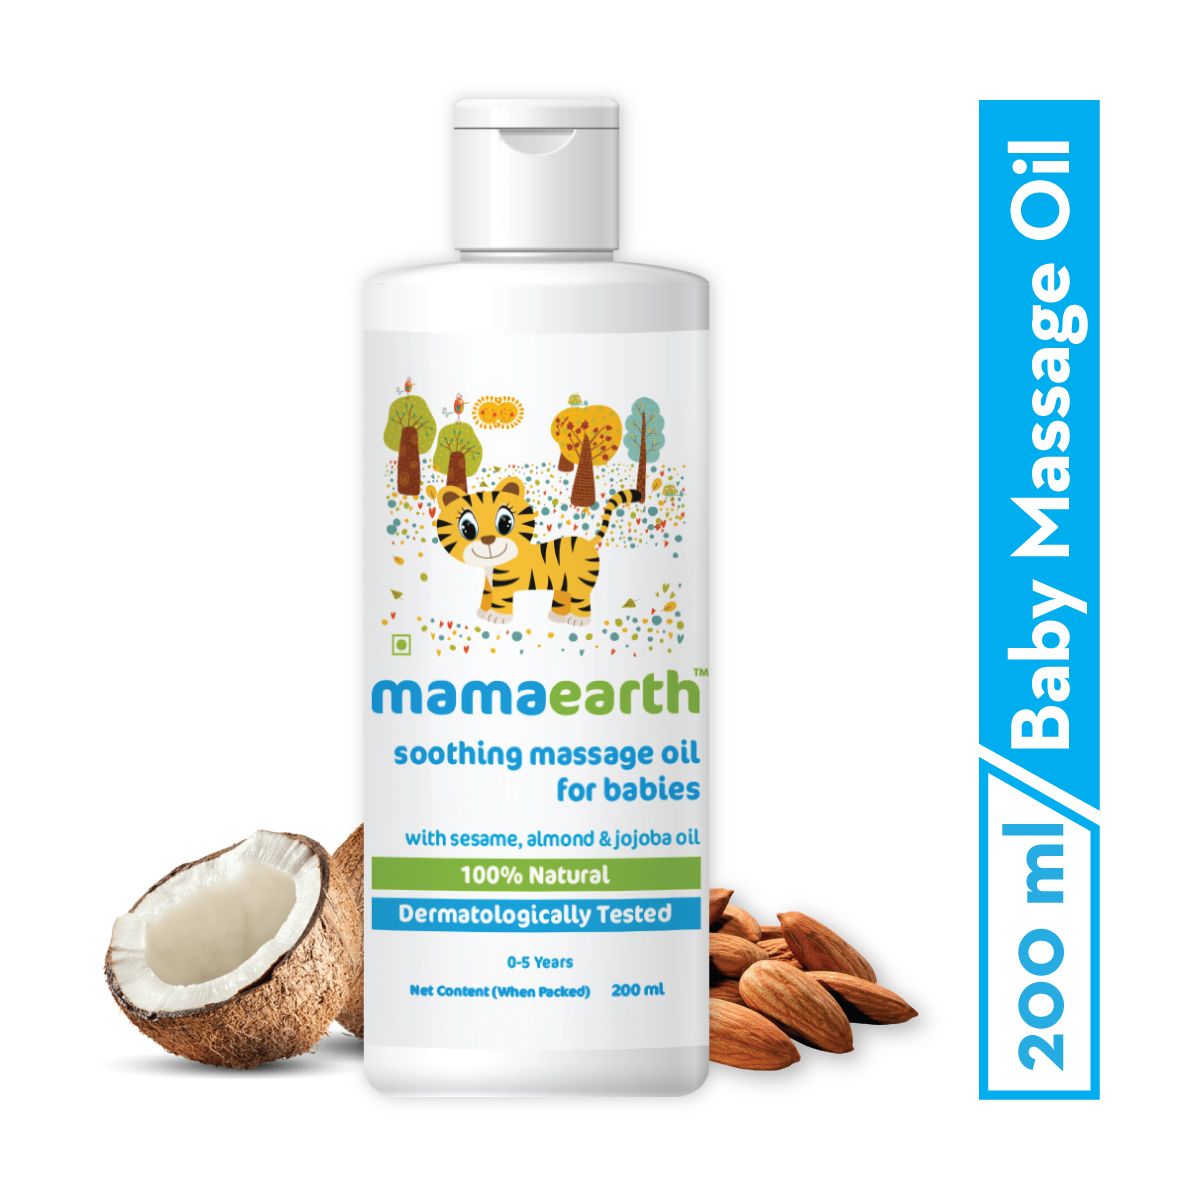  Mamaearth Soothing Massage Oil Better Than Others